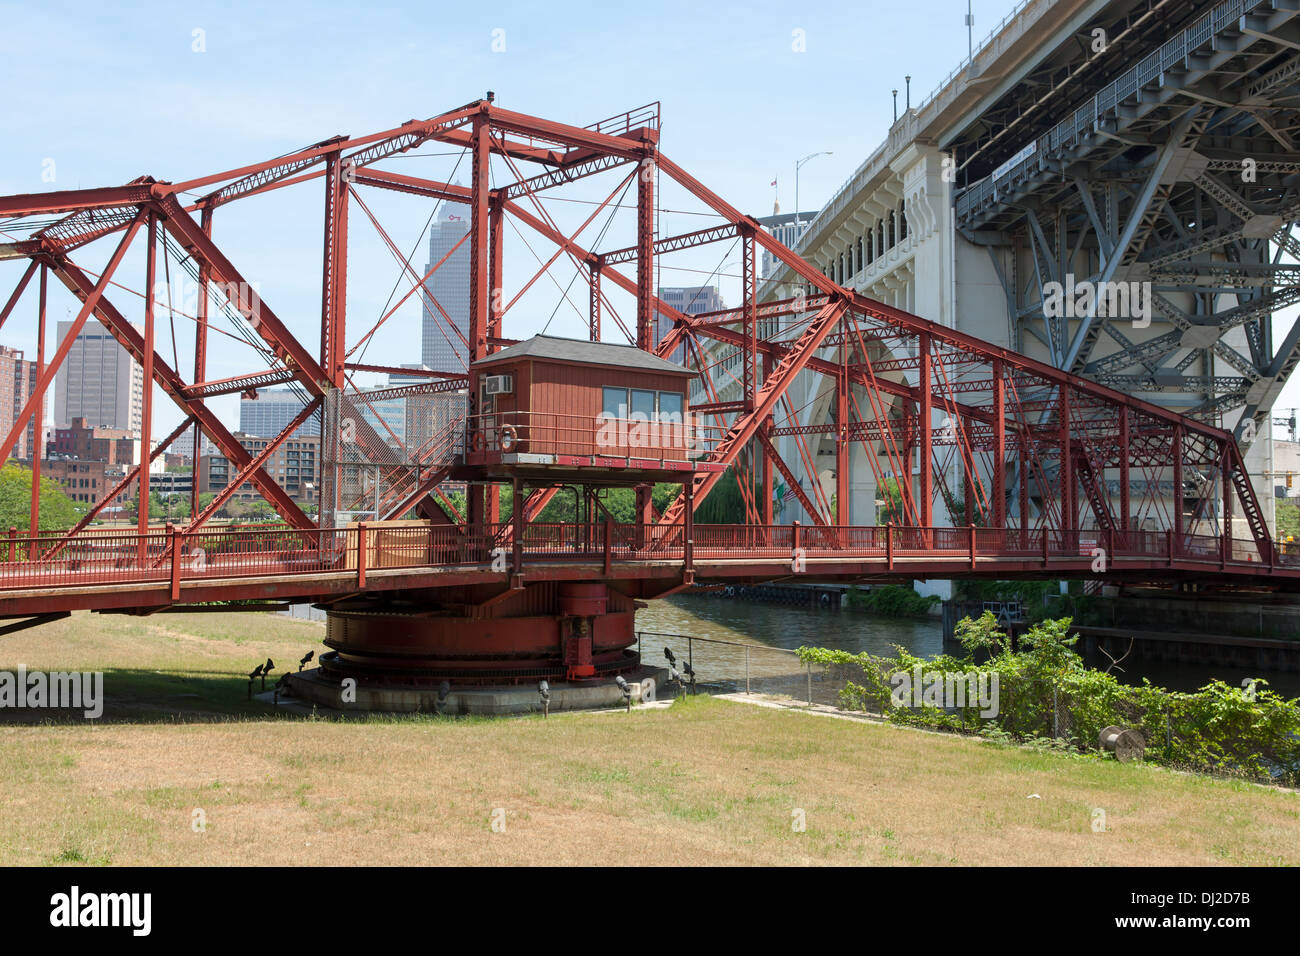 The Center Street Swing Bridge moves back into position after allowing a ship to pass on the Cuyahoga River in Cleveland, Ohio. Stock Photo